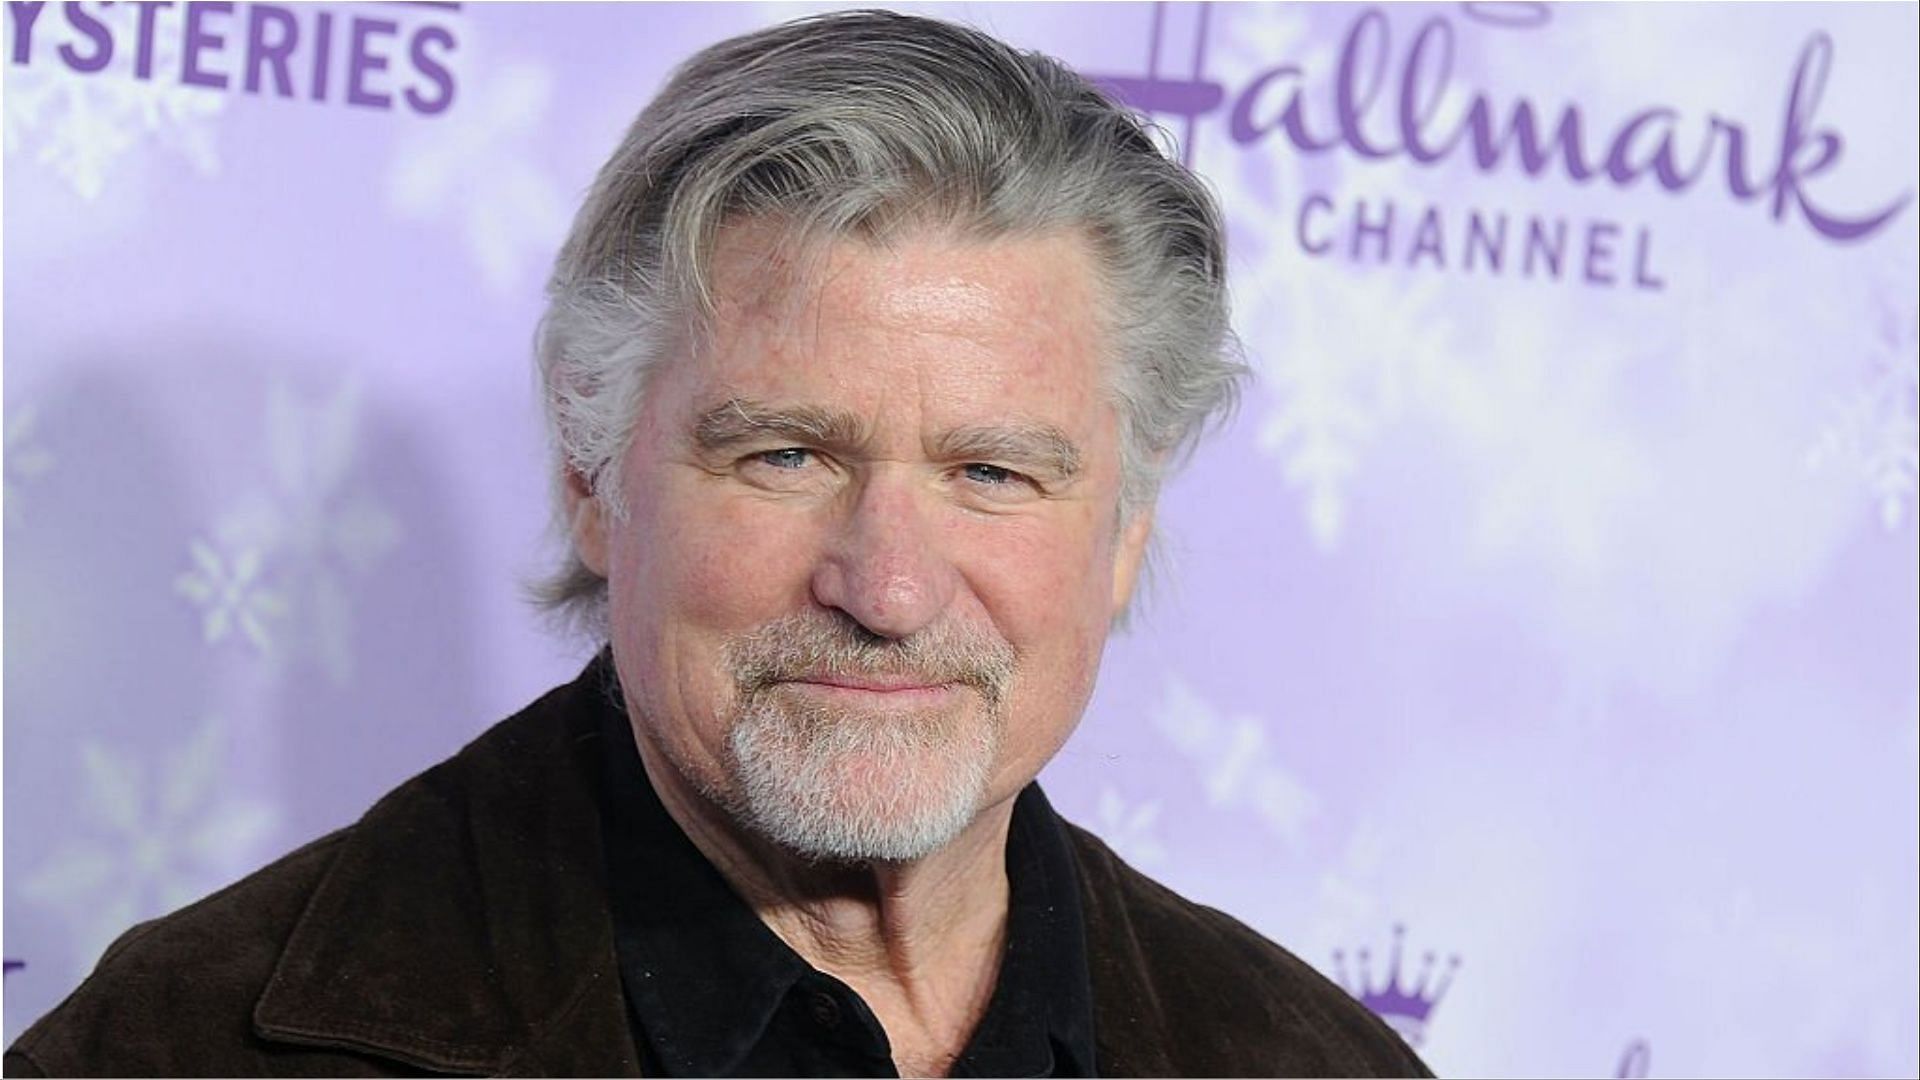 Treat Williams was 71 years old at the time of death (Image via Gregg DeGuire/Getty Images)